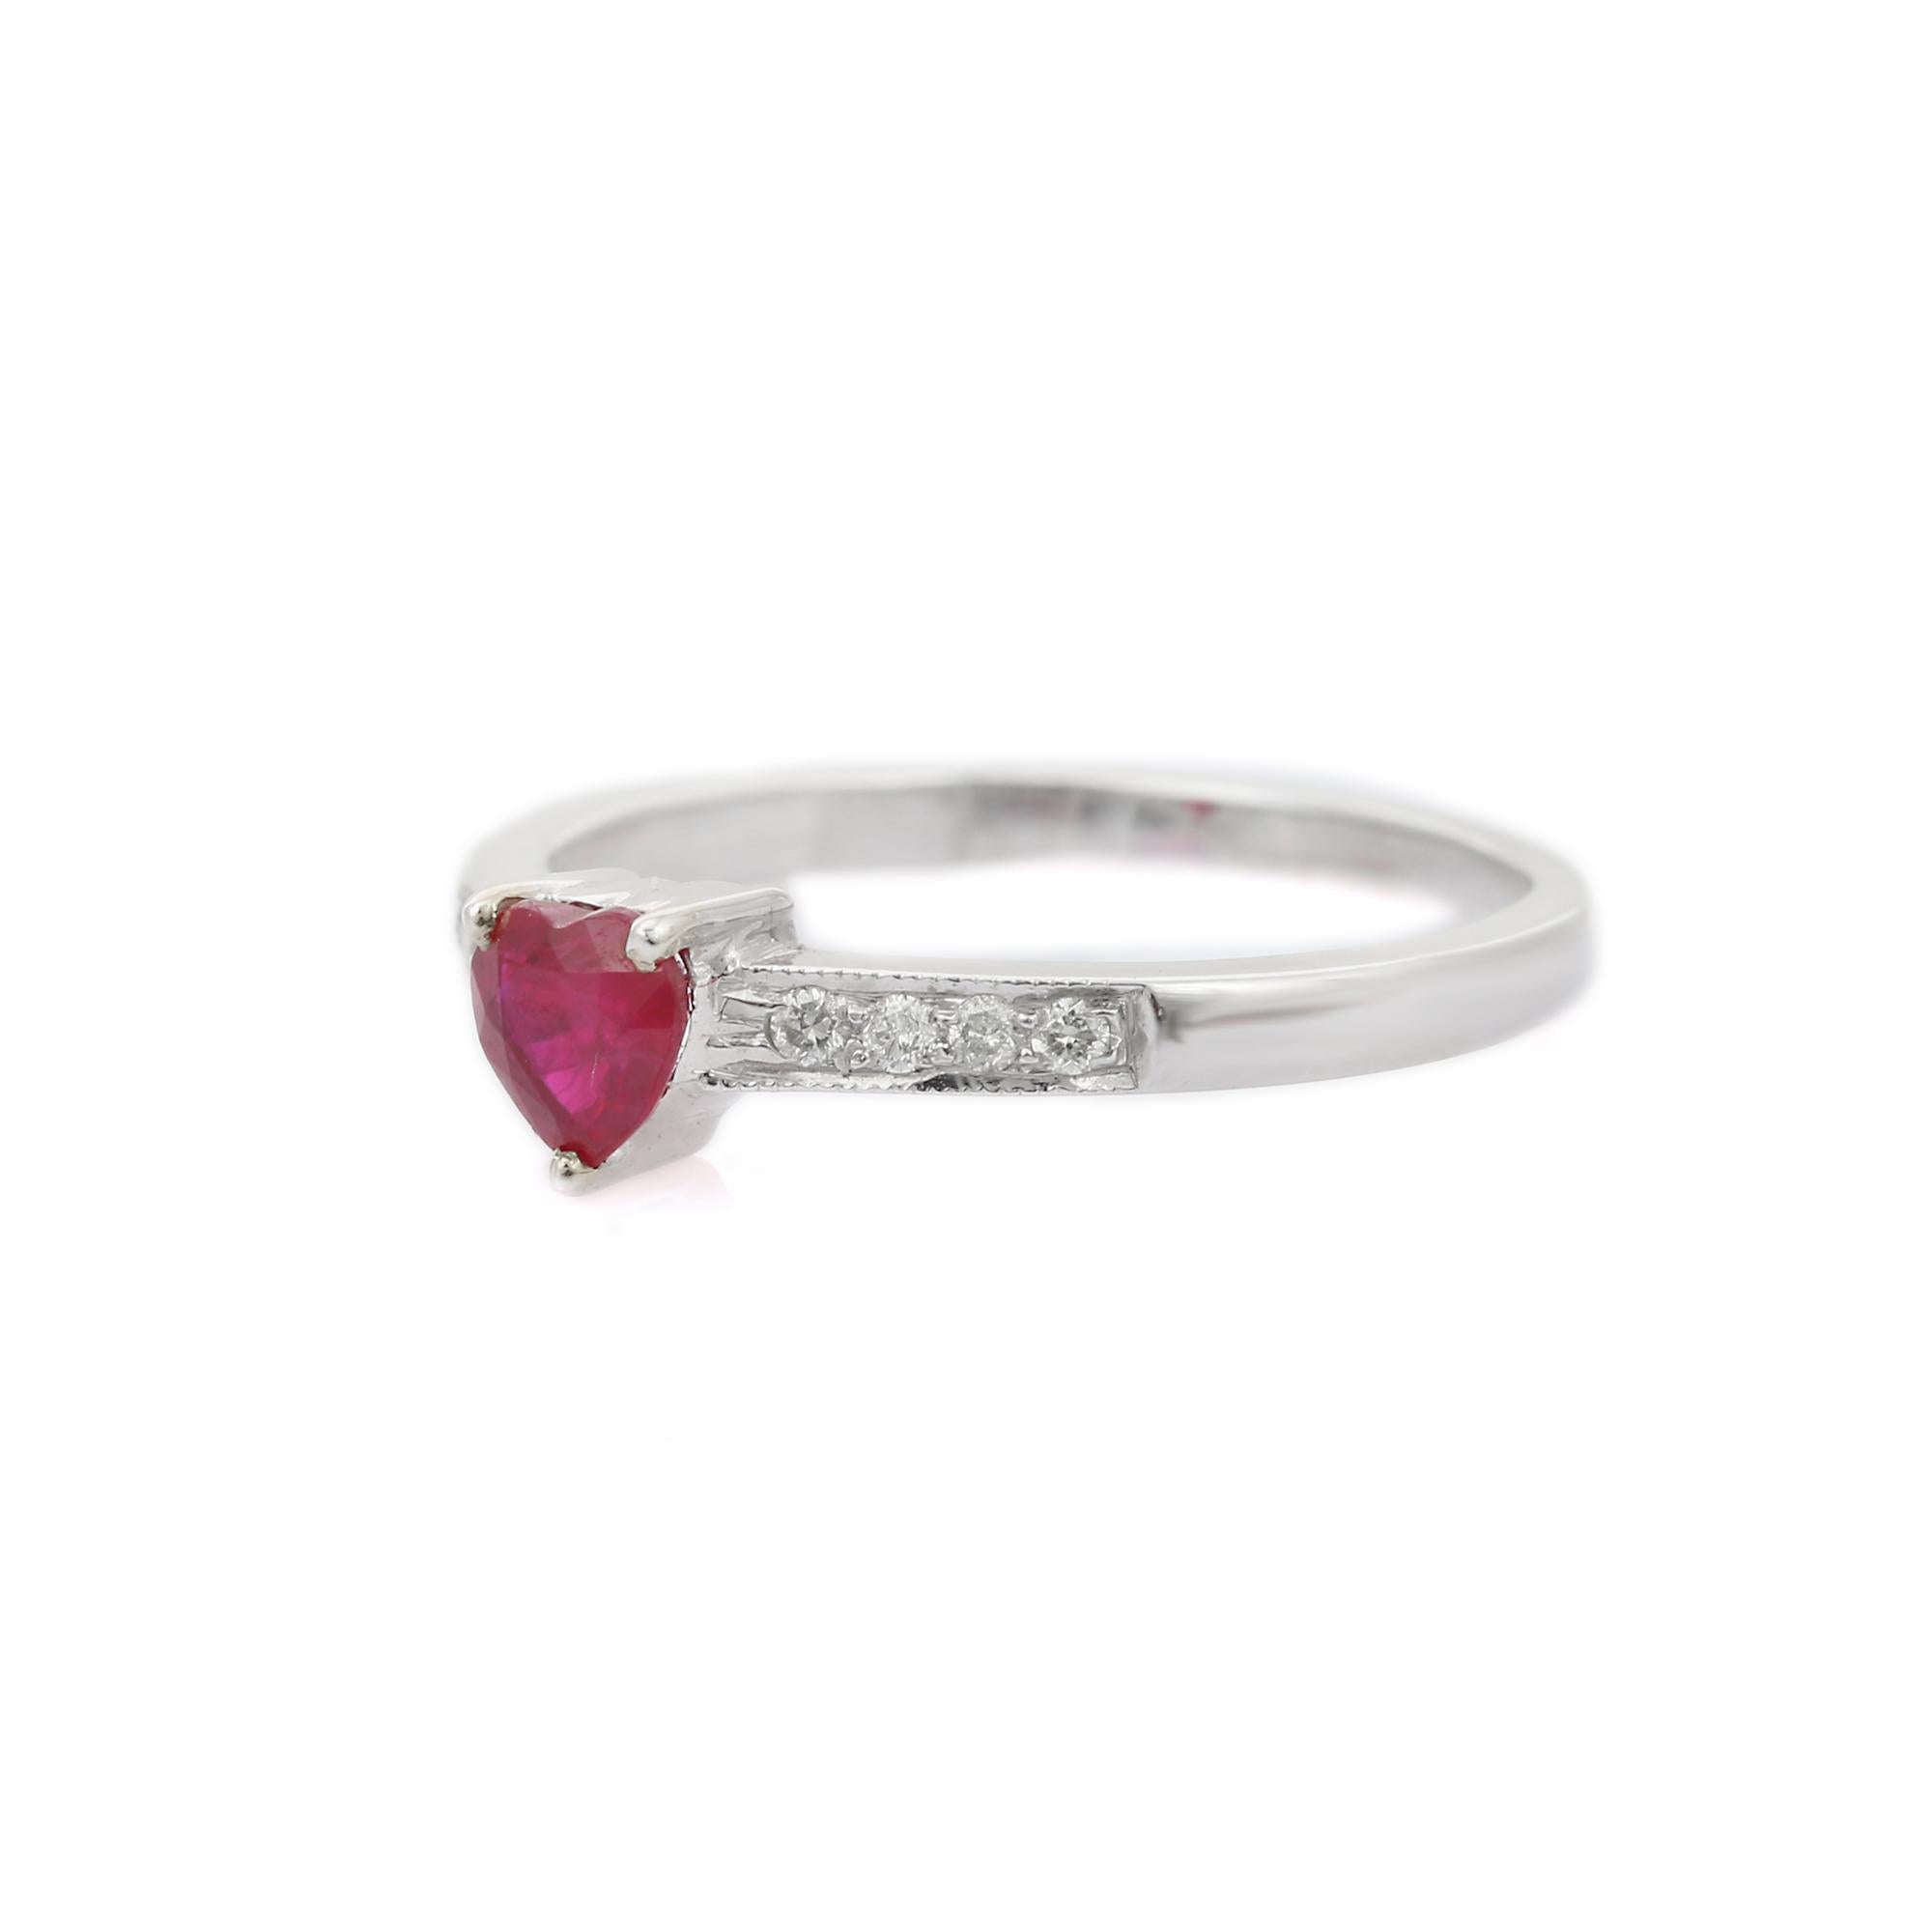 For Sale:  Dainty Heart Cut Ruby Ring 18k Solid White Gold with Diamonds 3